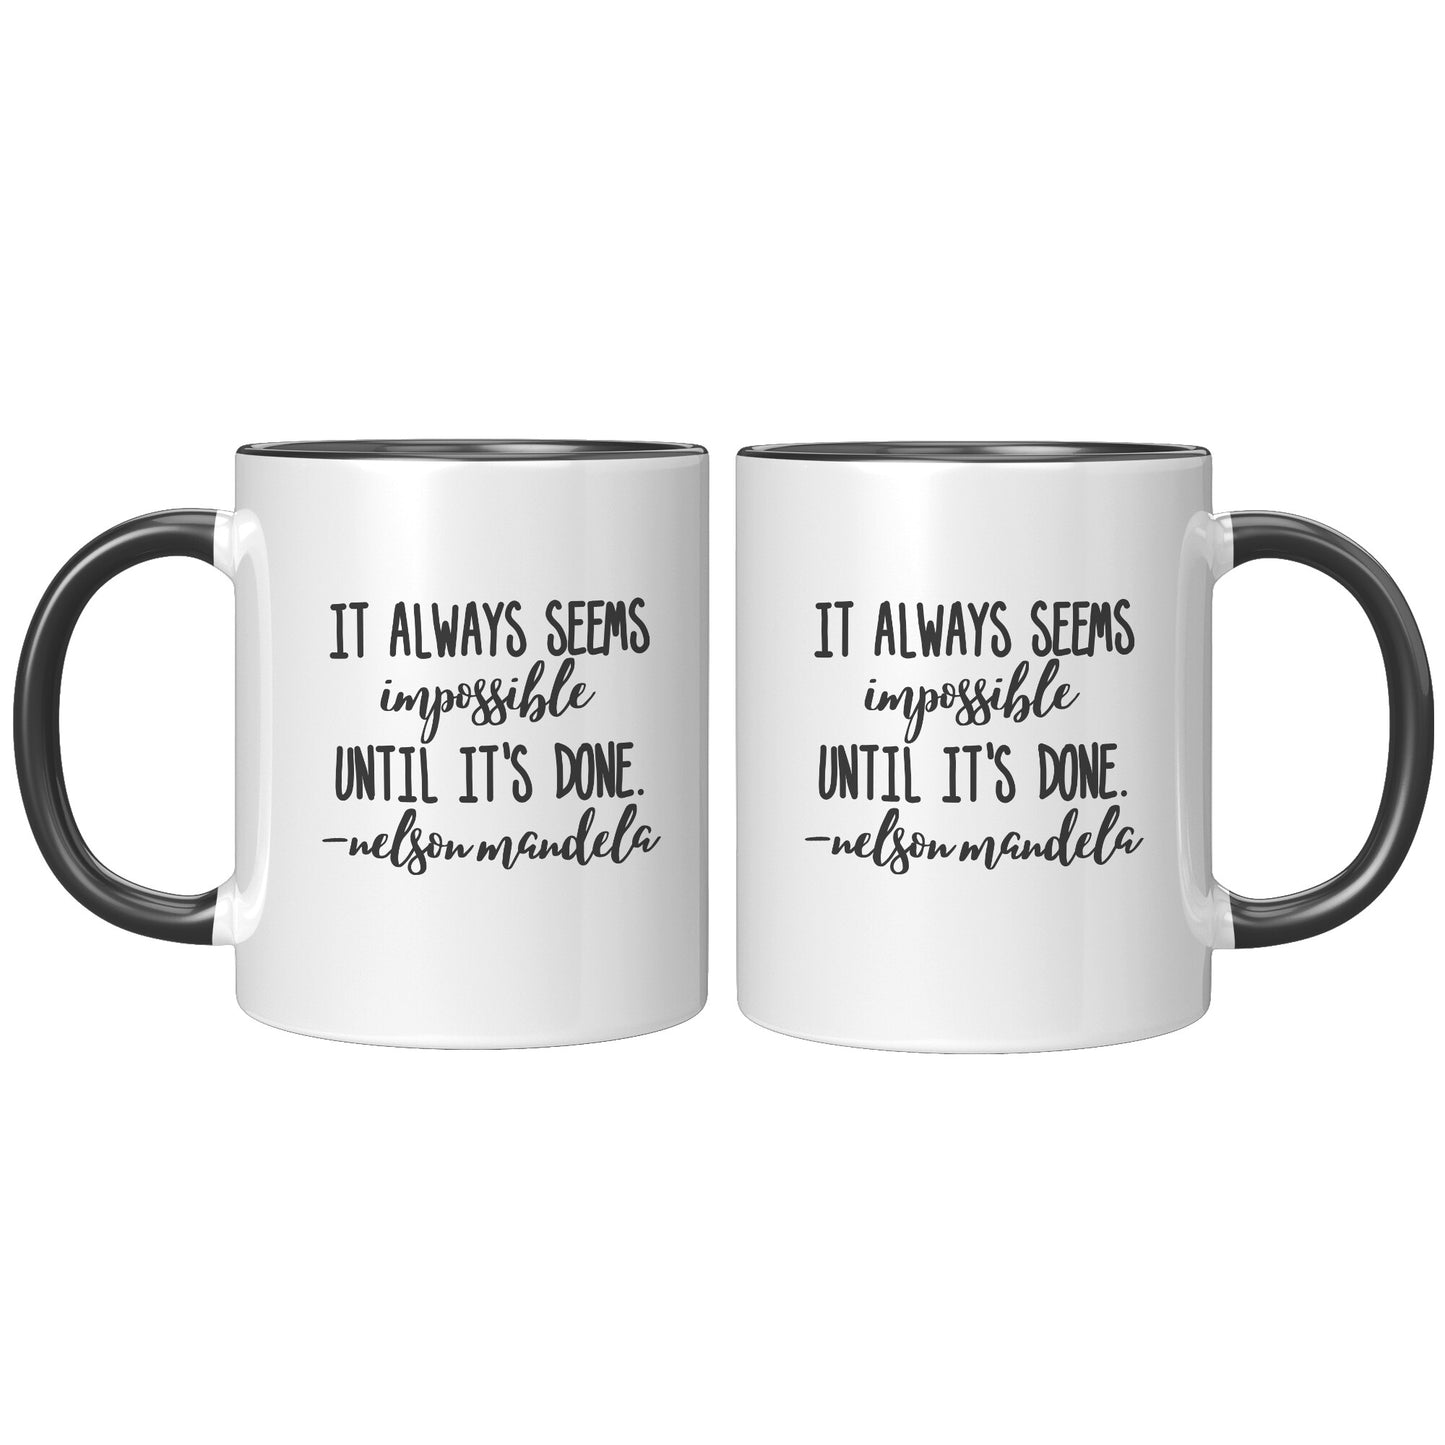 Coffee Mug with Quote, "It Always Seems Impossible Until It's Done."